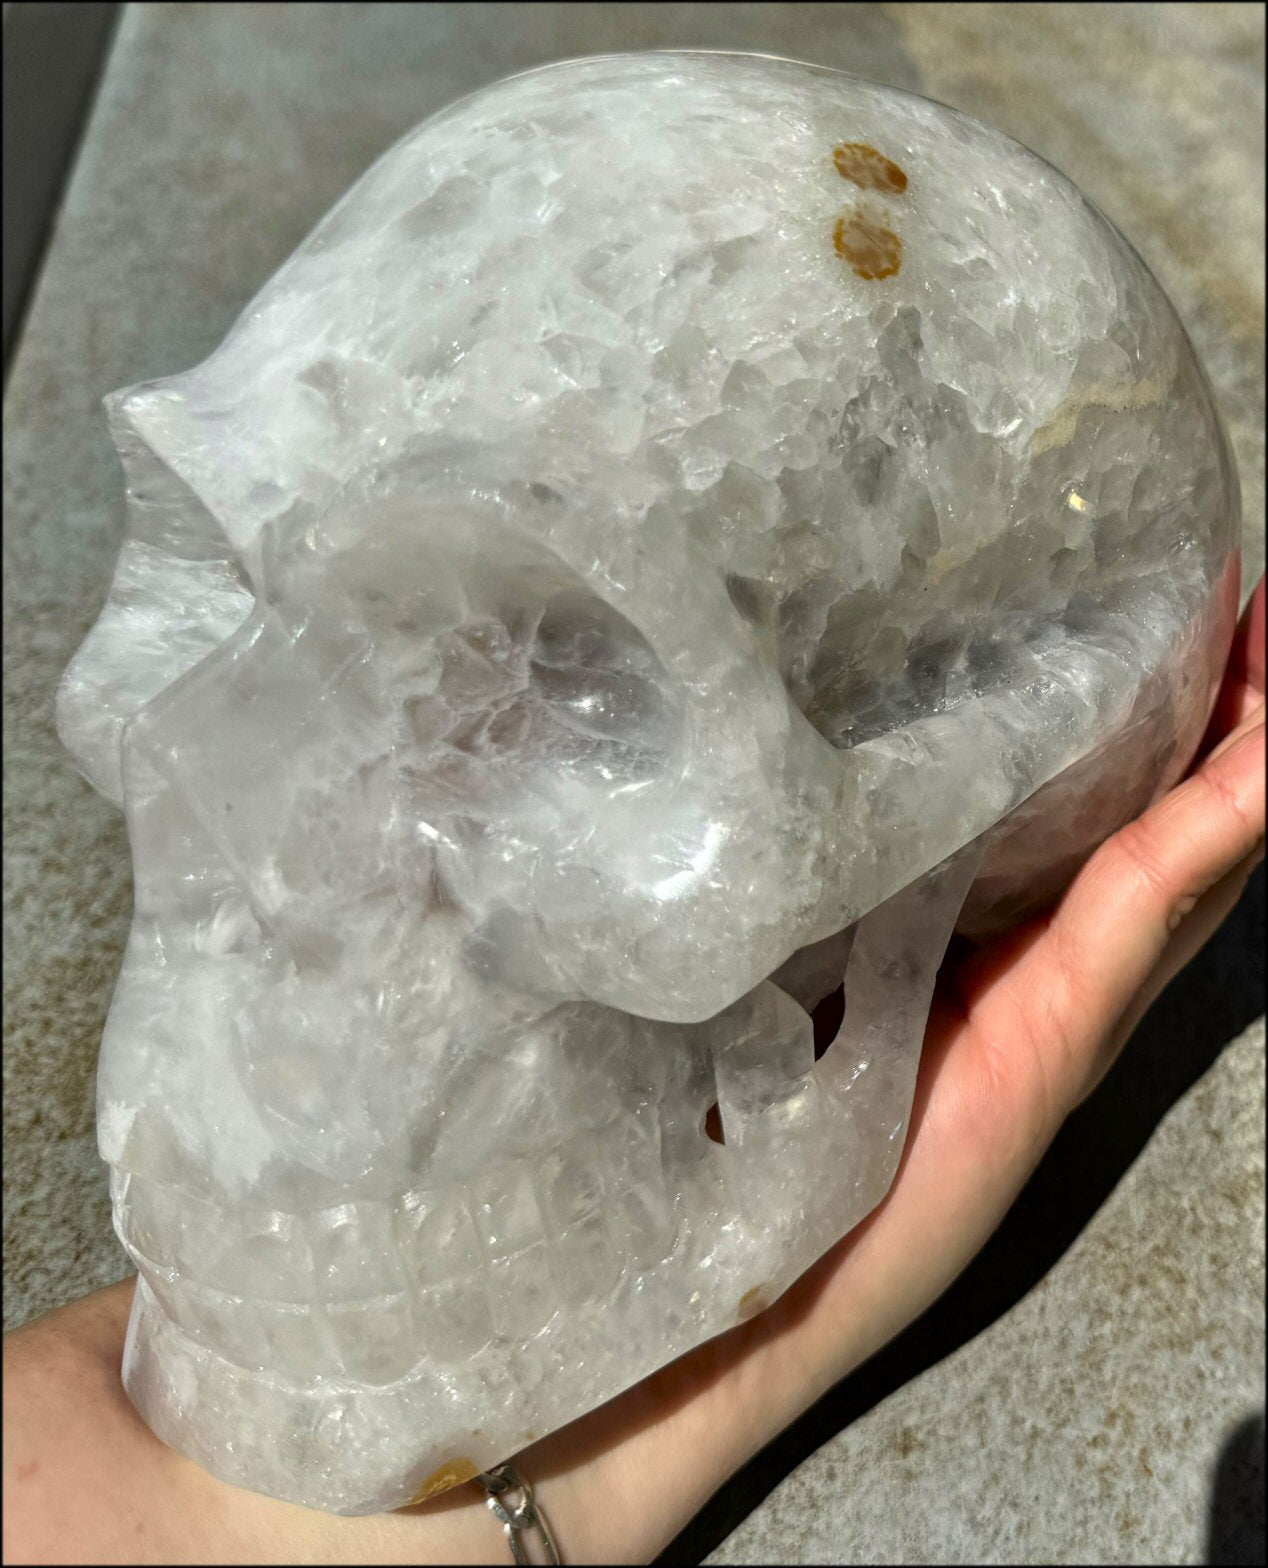 ~Super Sale~ LifeSize AGATE GEODE Crystal Skull with Iron Dendrite "Blossoms", Amazing crystalline structures - just under 9lbs